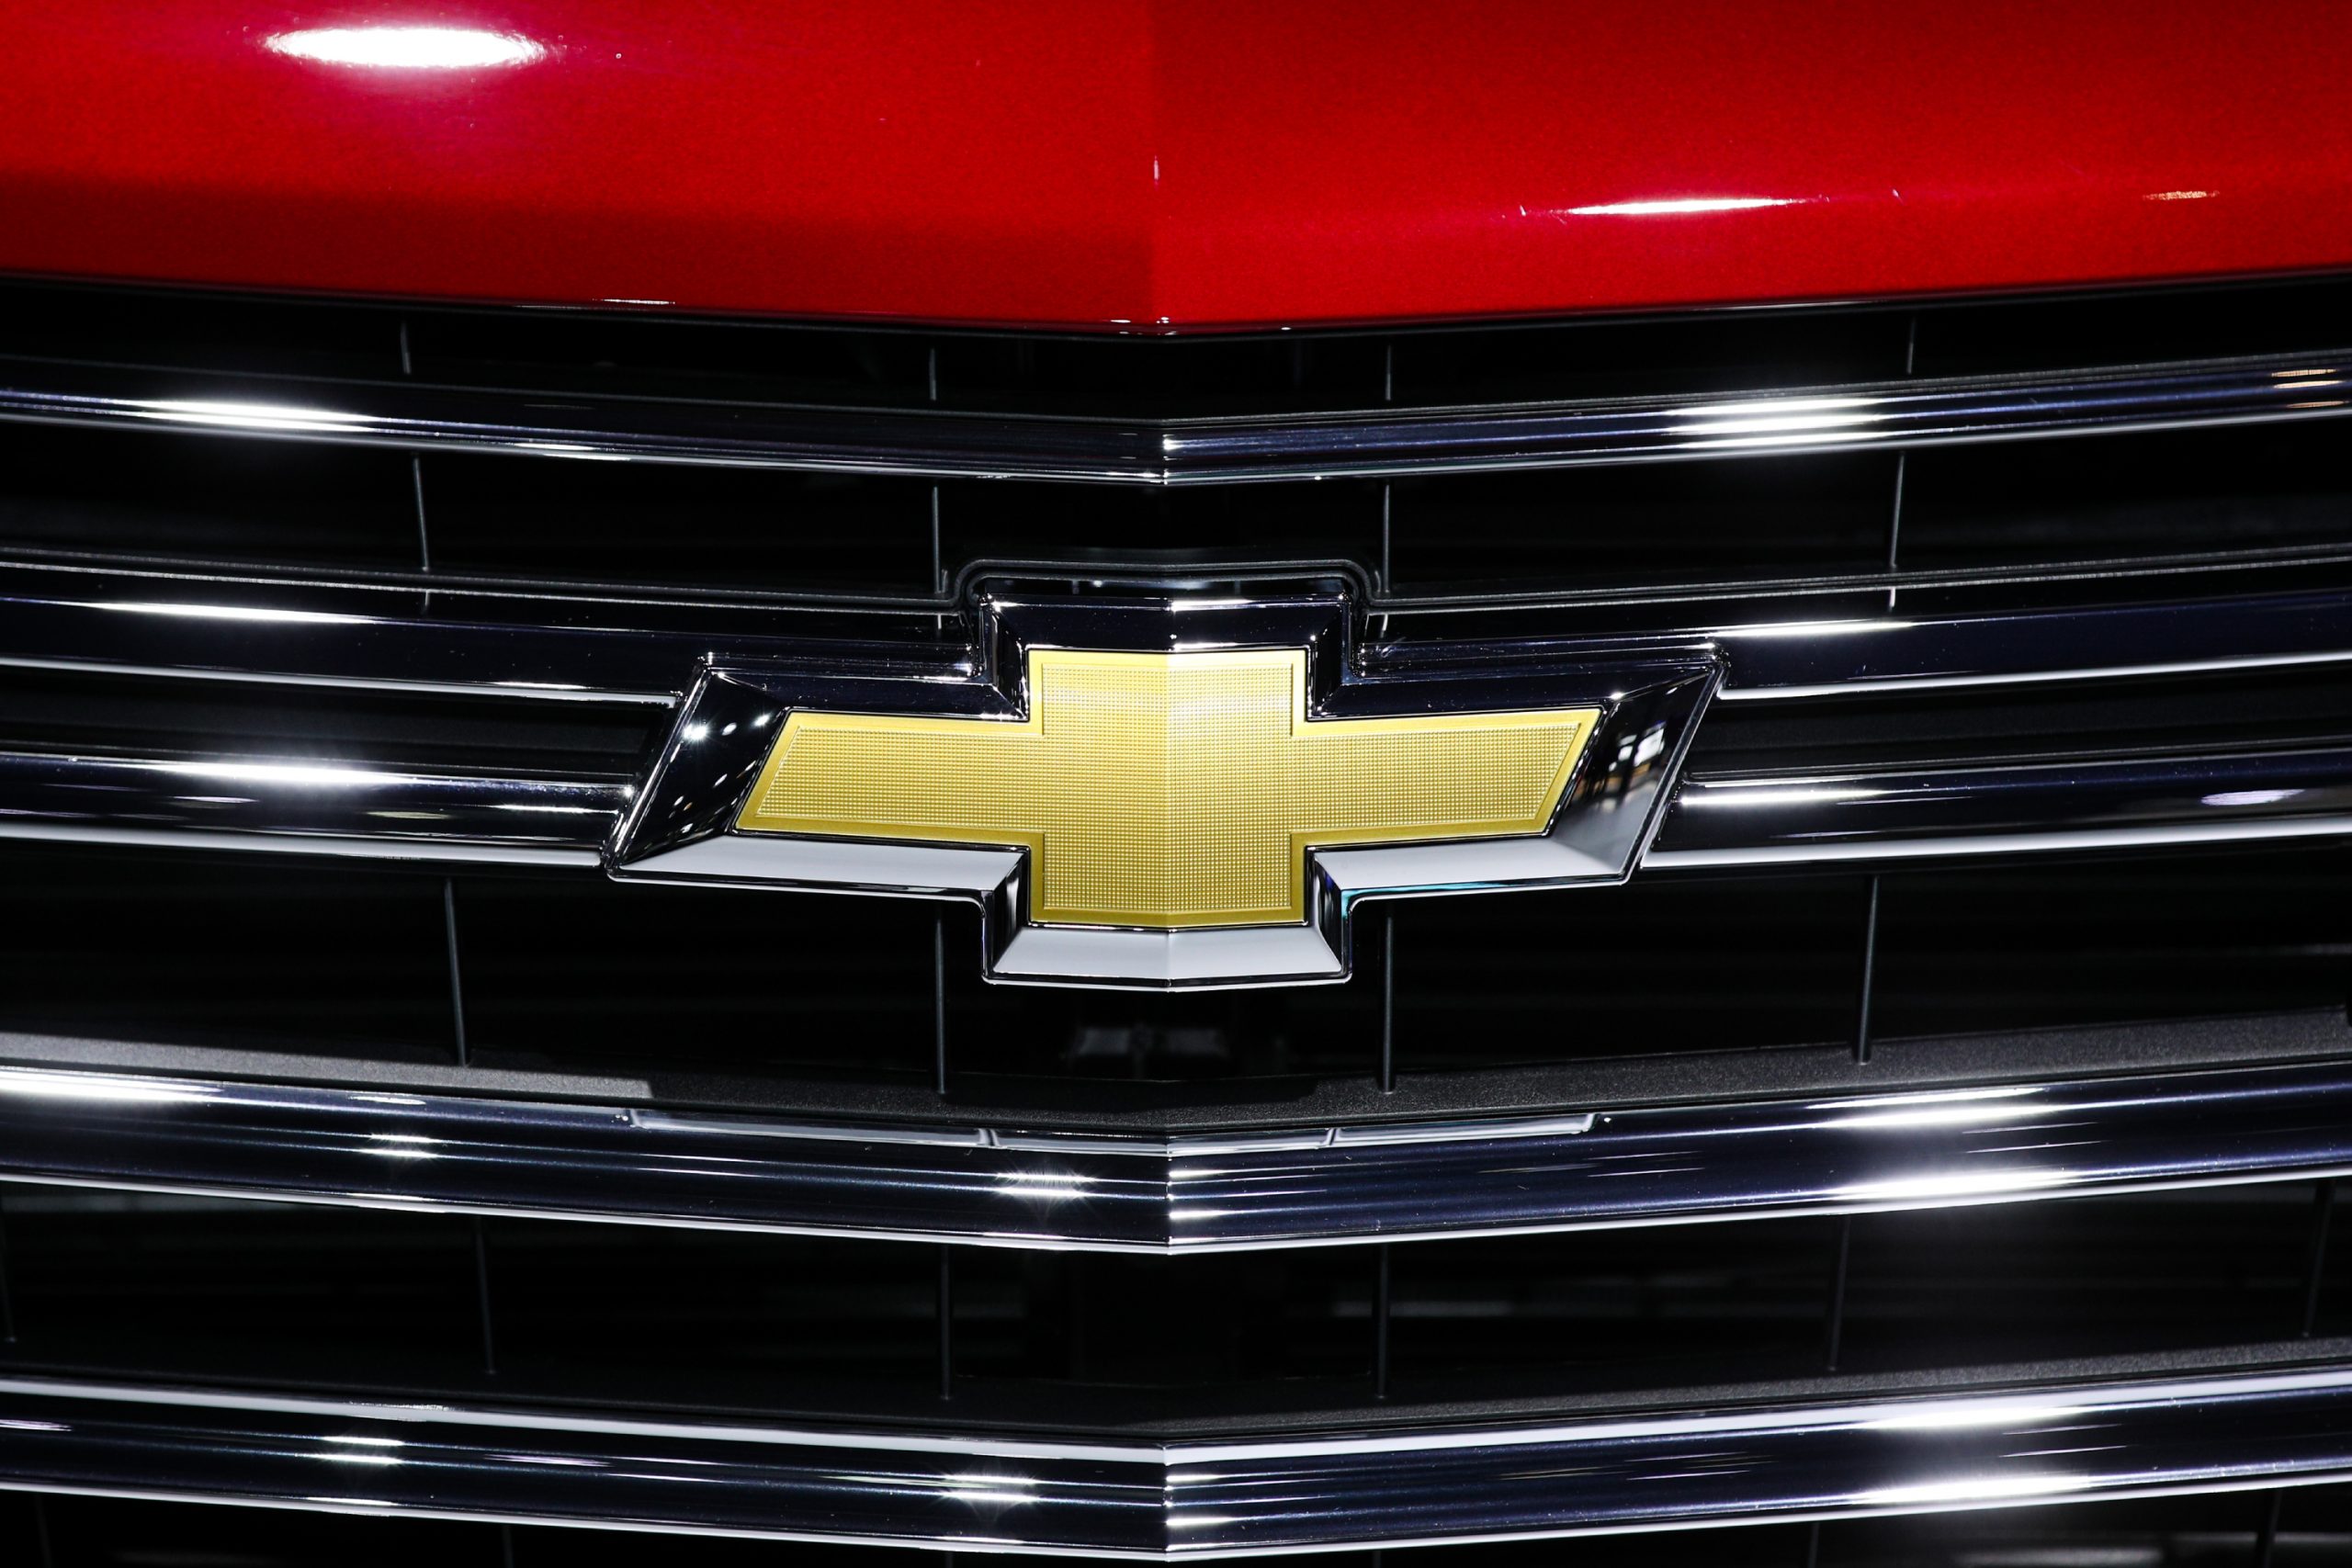 A close-up of Chevy's bow-tie logo on the grille of a car